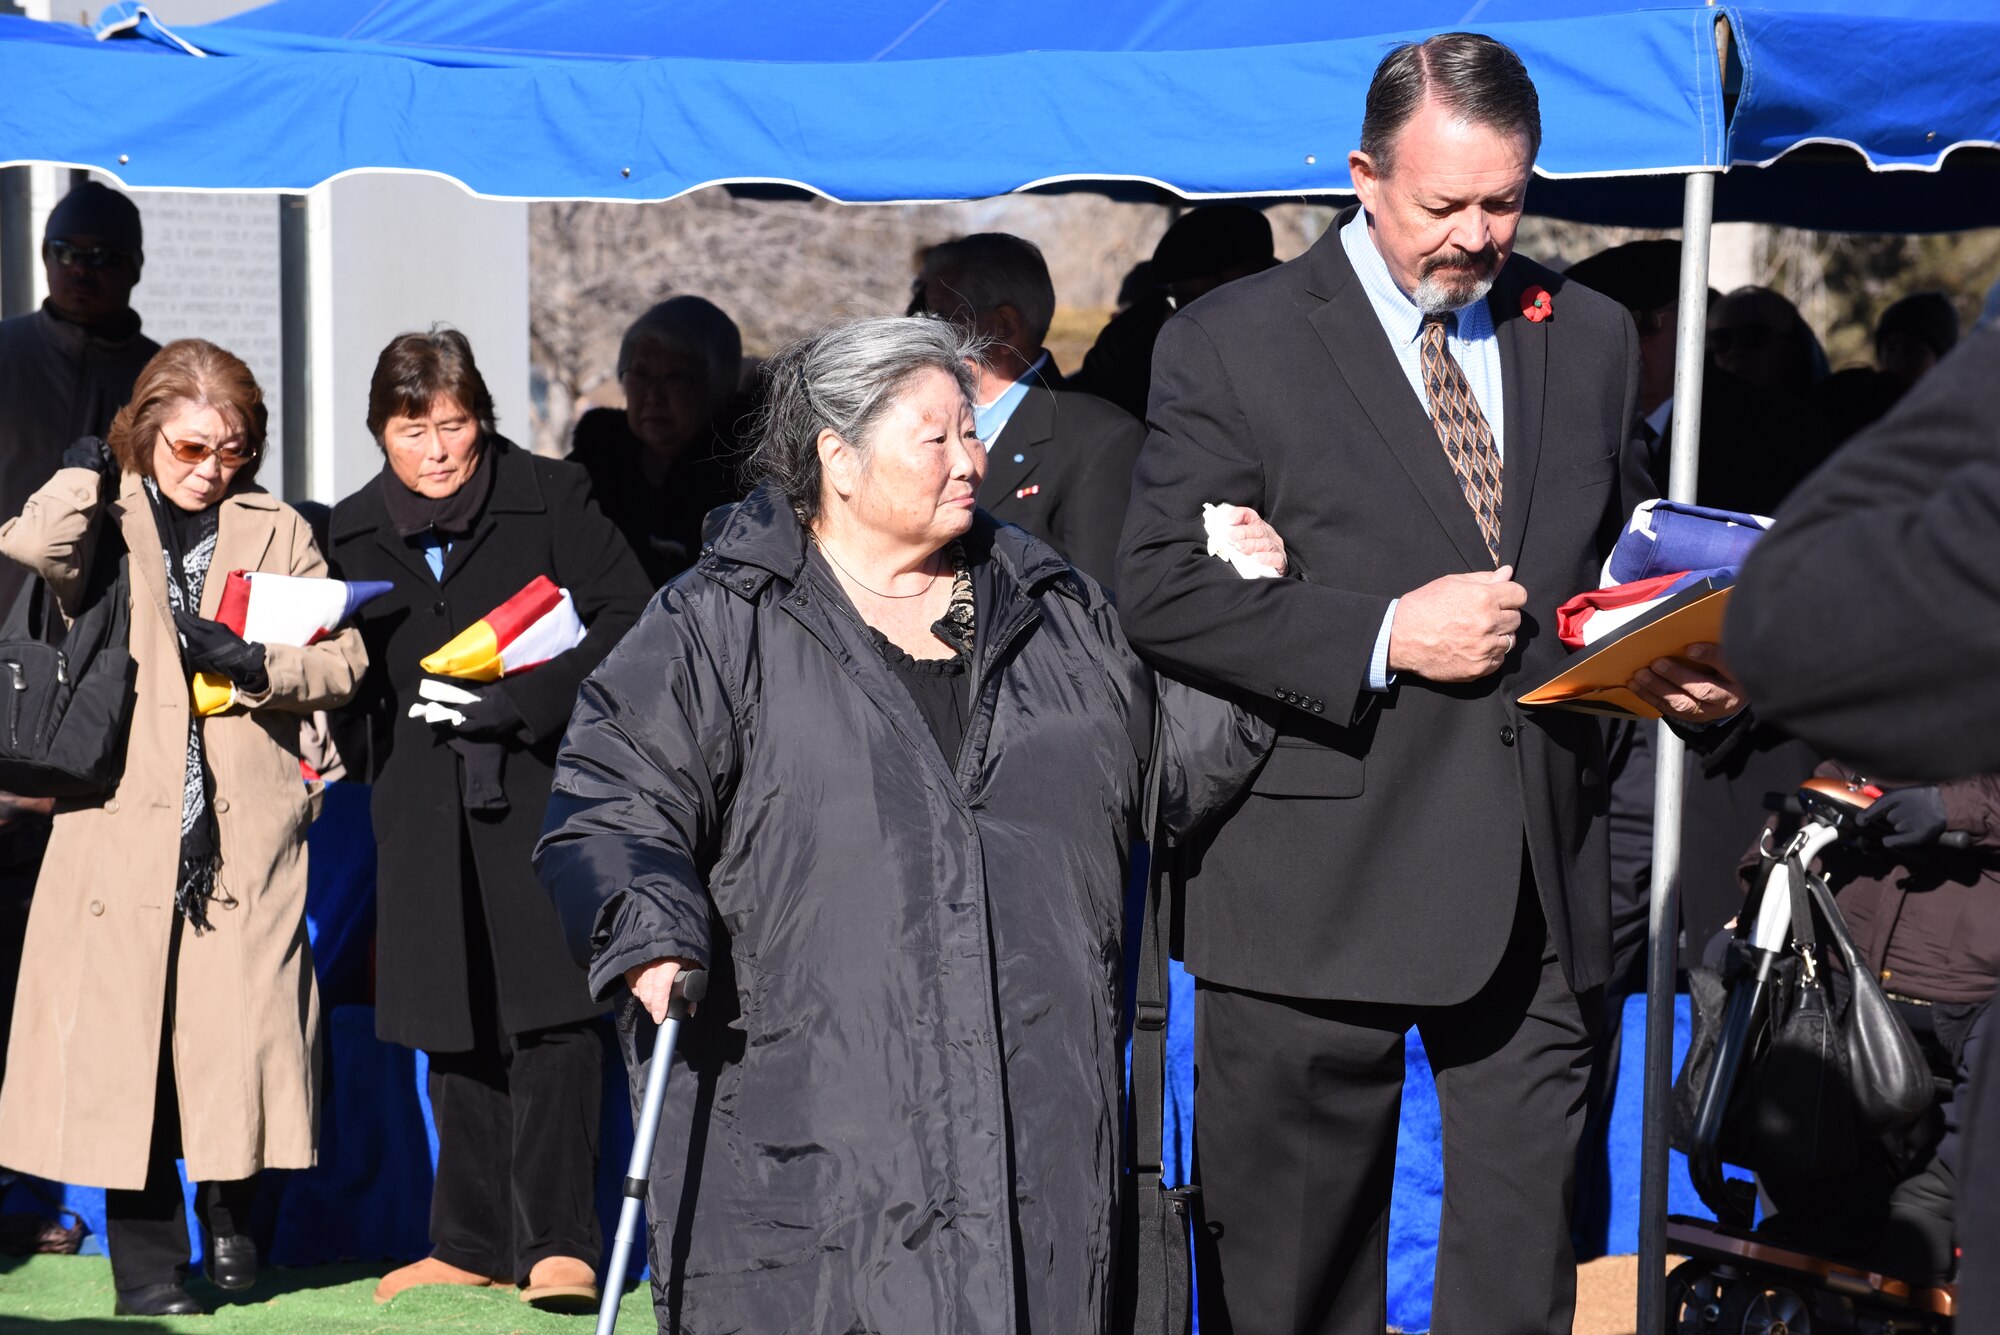 Rick Crandall escorts Leslie, the daughter of Medal of Honor recipient U.S. Army Pvt. George “Joe” Sakato, following Sakato's interment at Fairmount Cemetery in Denver, Jan. 16, 2016. Sakato, Colorado resident and Medal of Honor recipient from World War II, was laid to rest with full military honors. Sakato distinguished himself by extraordinary heroism in action Oct. 29, 1944, on Hill 617 in the vicinity of Biffontaine, France. (U.S. Army National Guard photo by Staff Sgt. Manda Walters/Released)